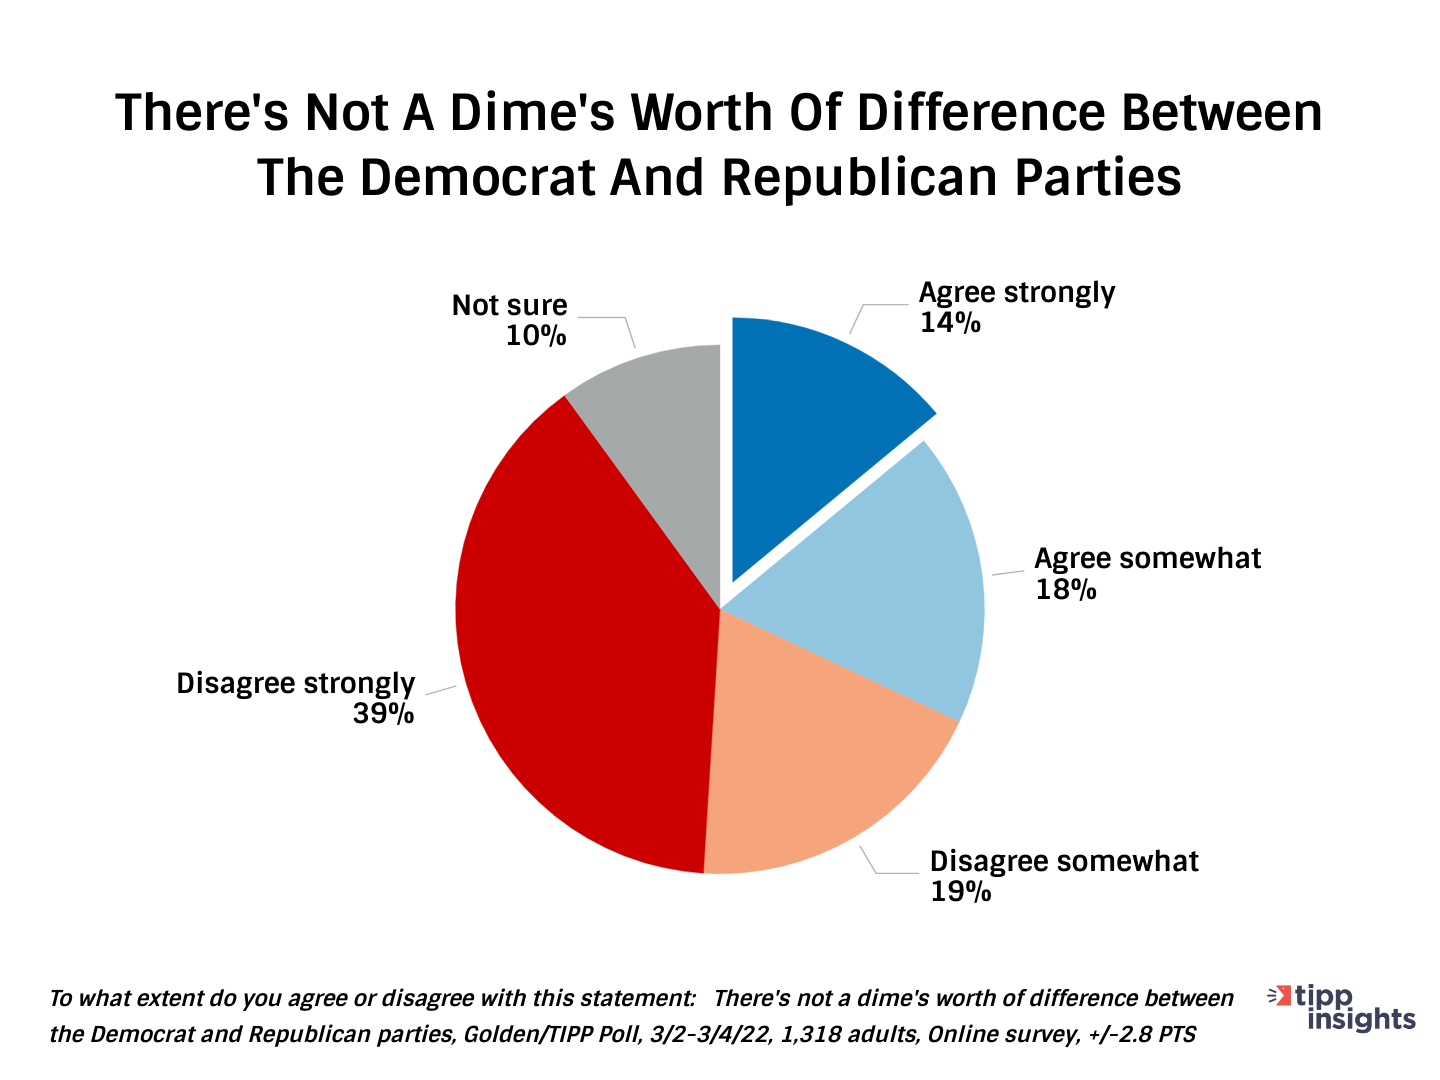 Perception of the two parties